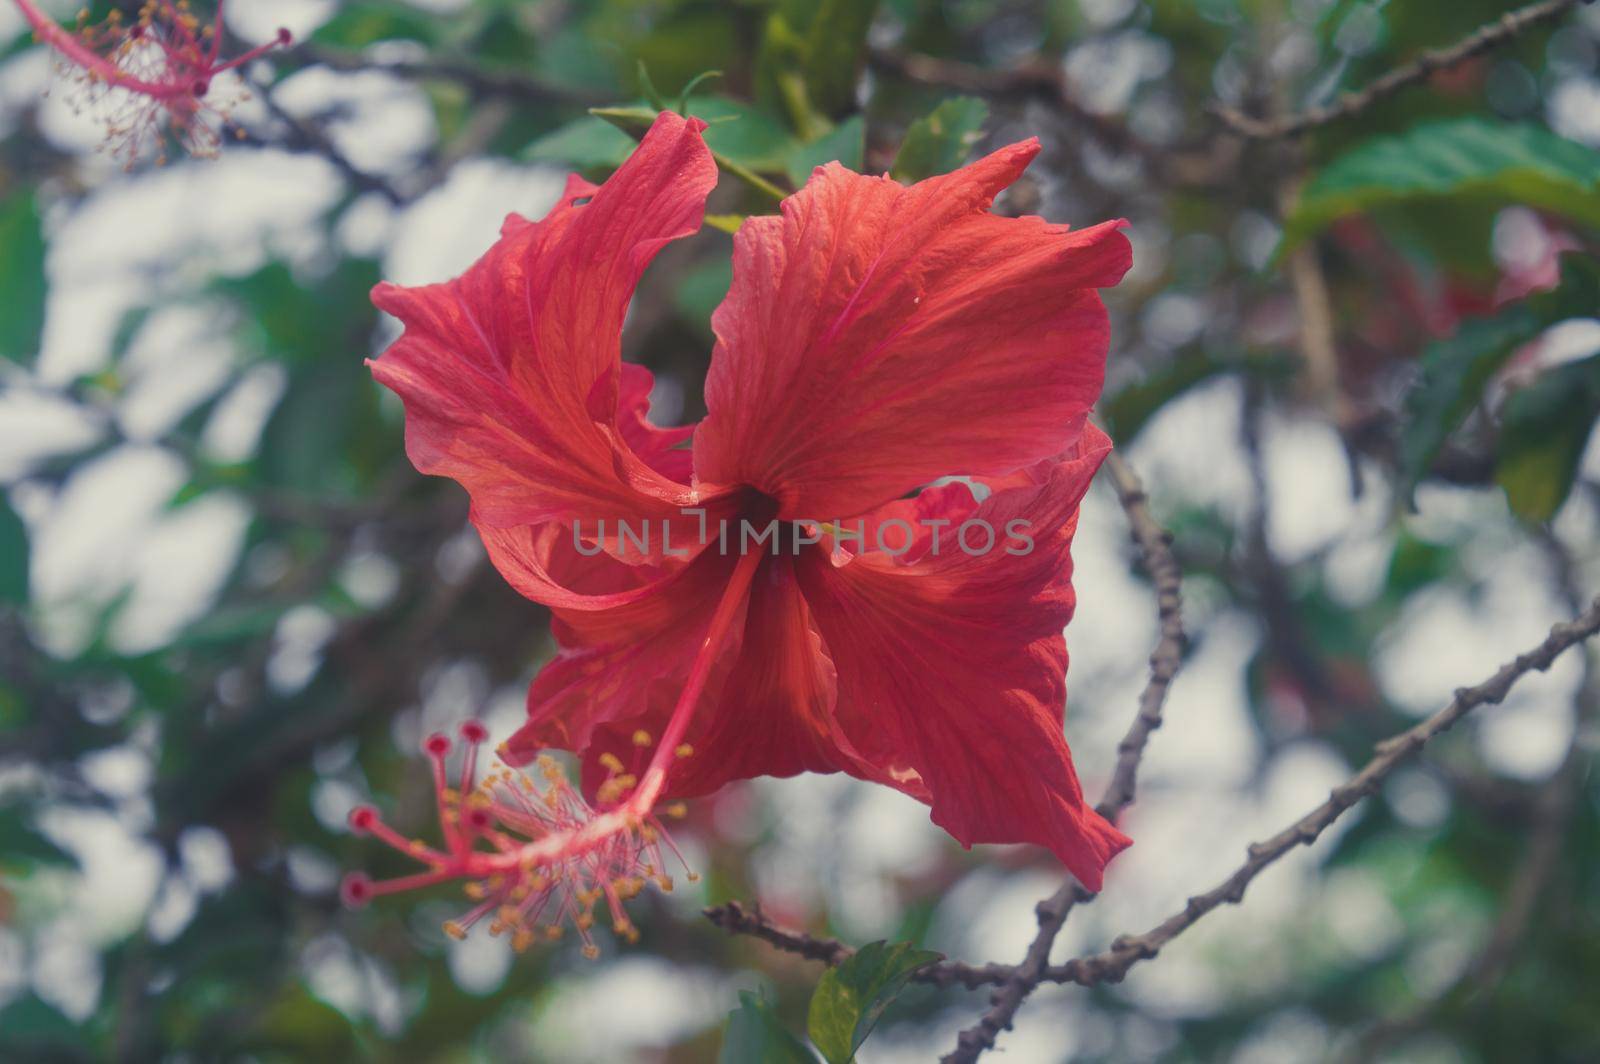 Siam Garden Red Hibiscus Flower or China rose Plant Gudhal Jaba Close Up. Illuminated by sunlight isolated from green leaves background. by sudiptabhowmick